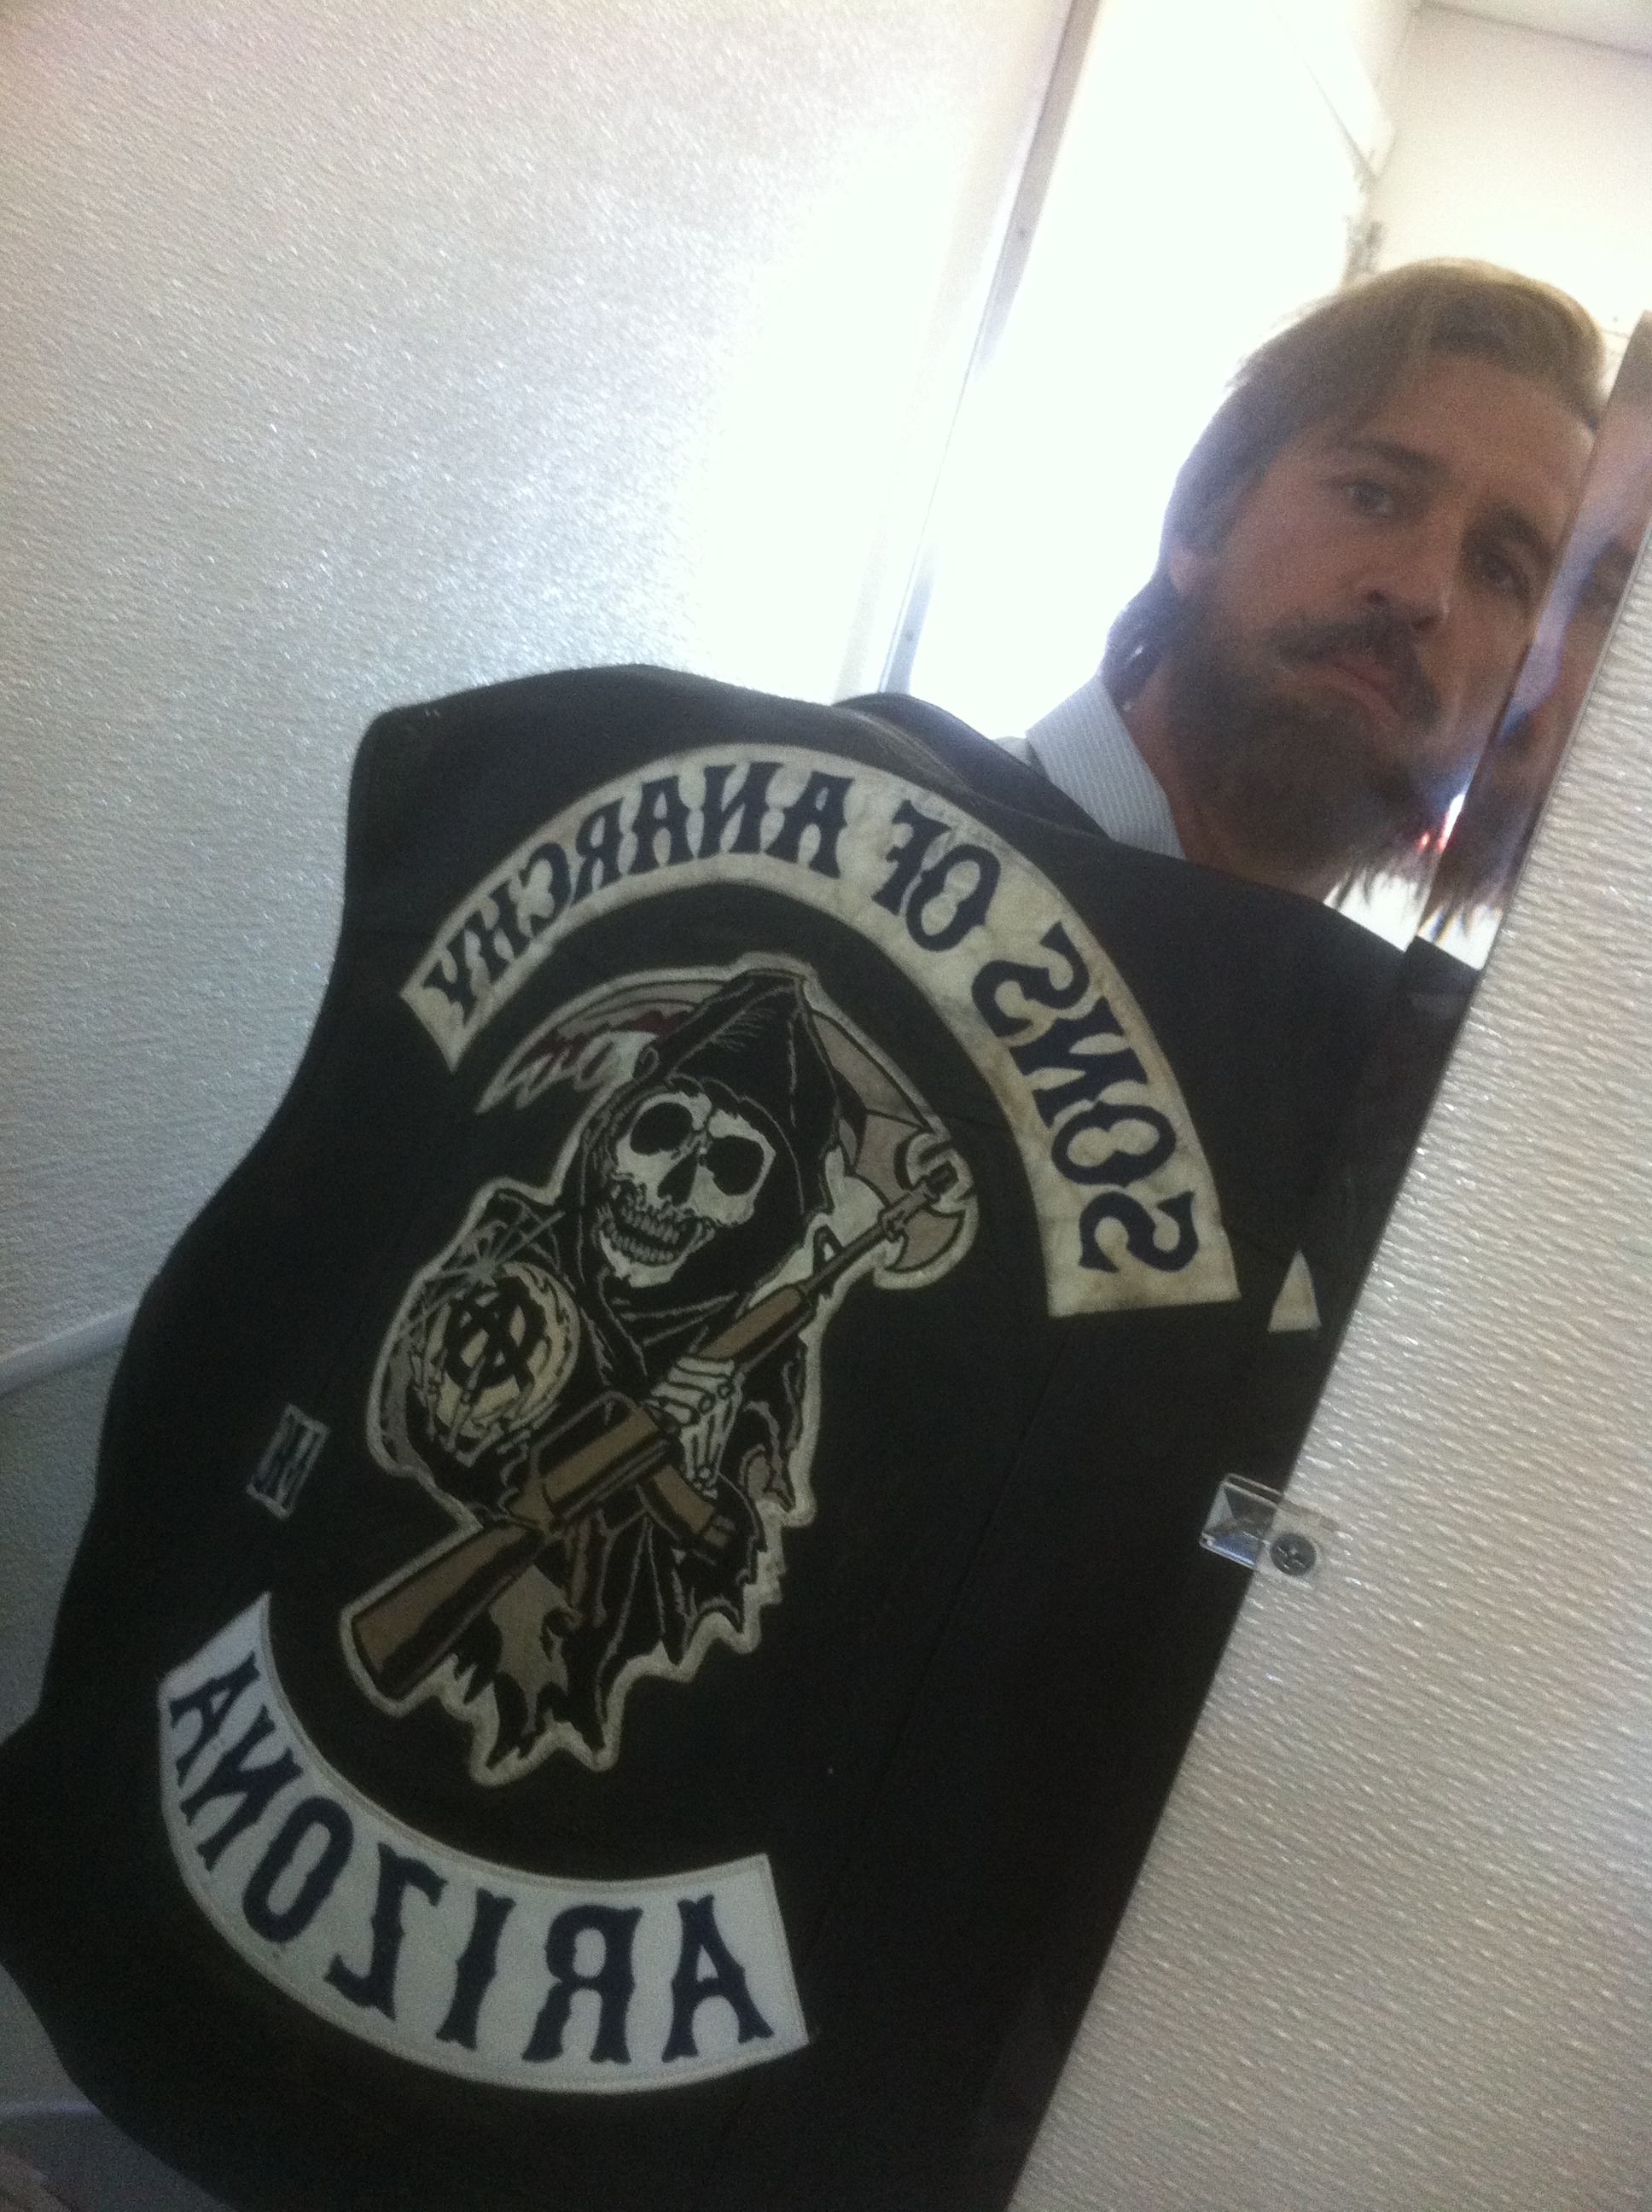 Another fun day on SAMCRO